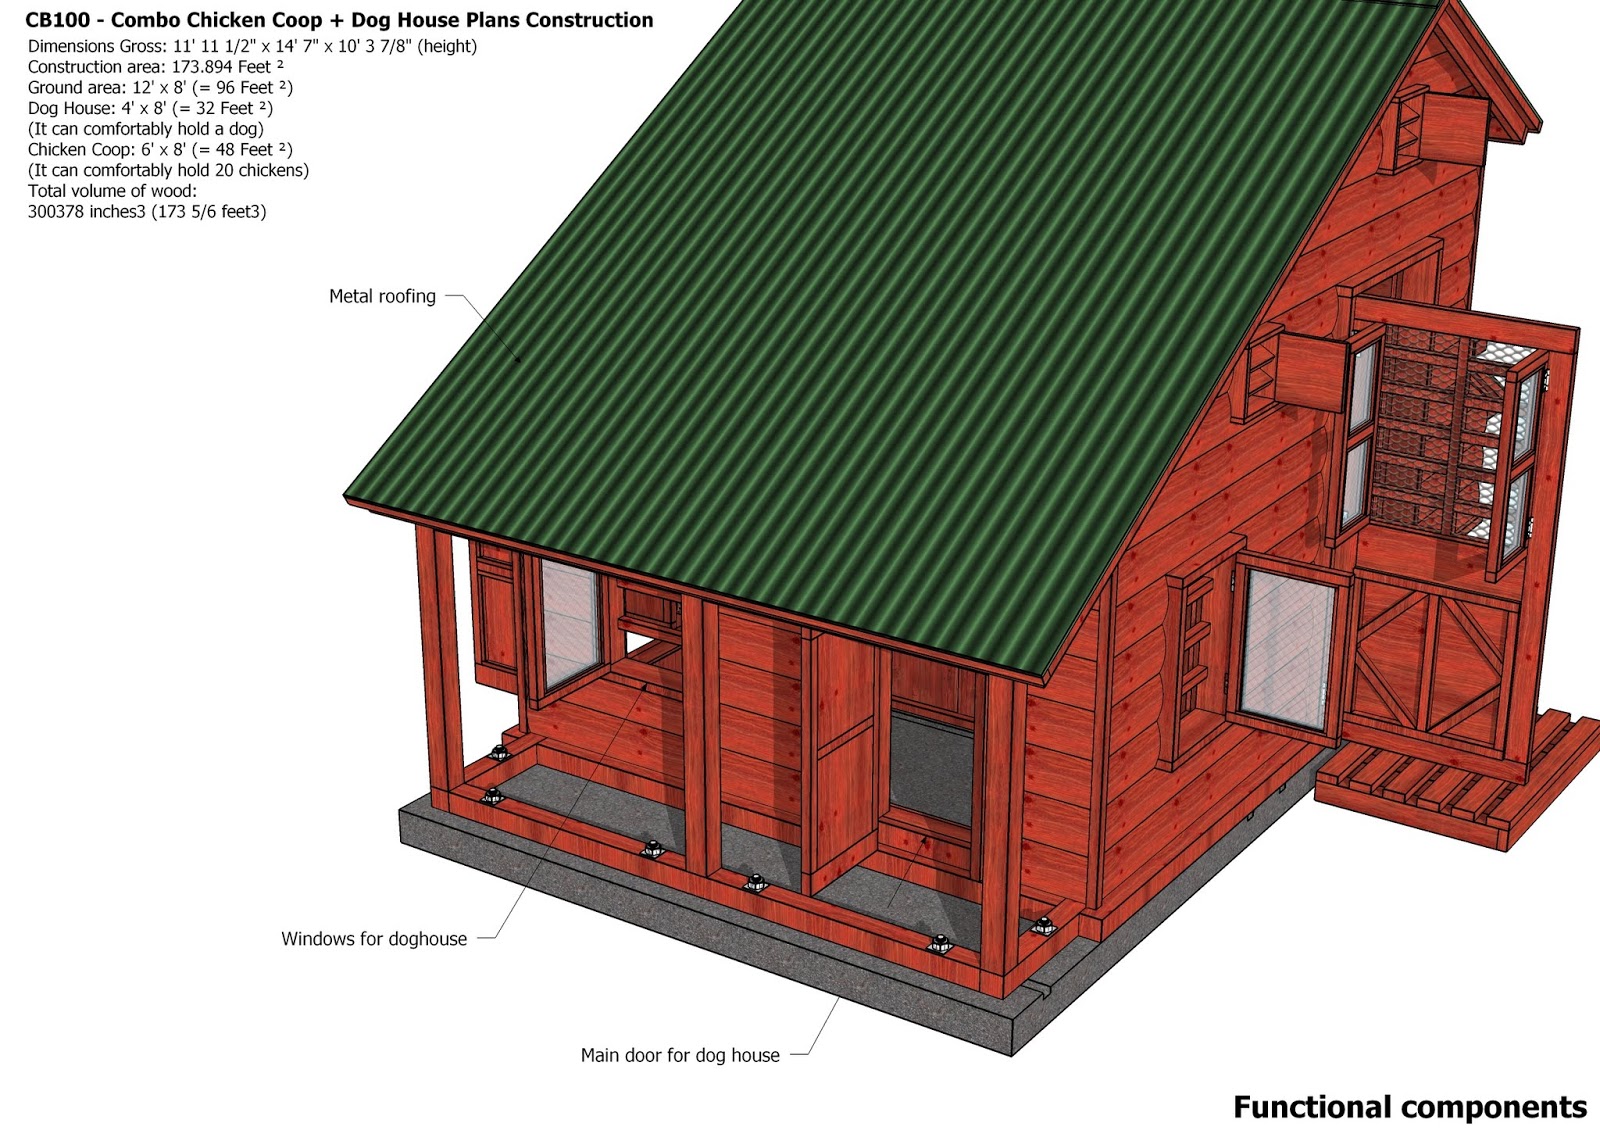  Plans – Chicken Coop Plans Construction + Insulated Dog House Plans